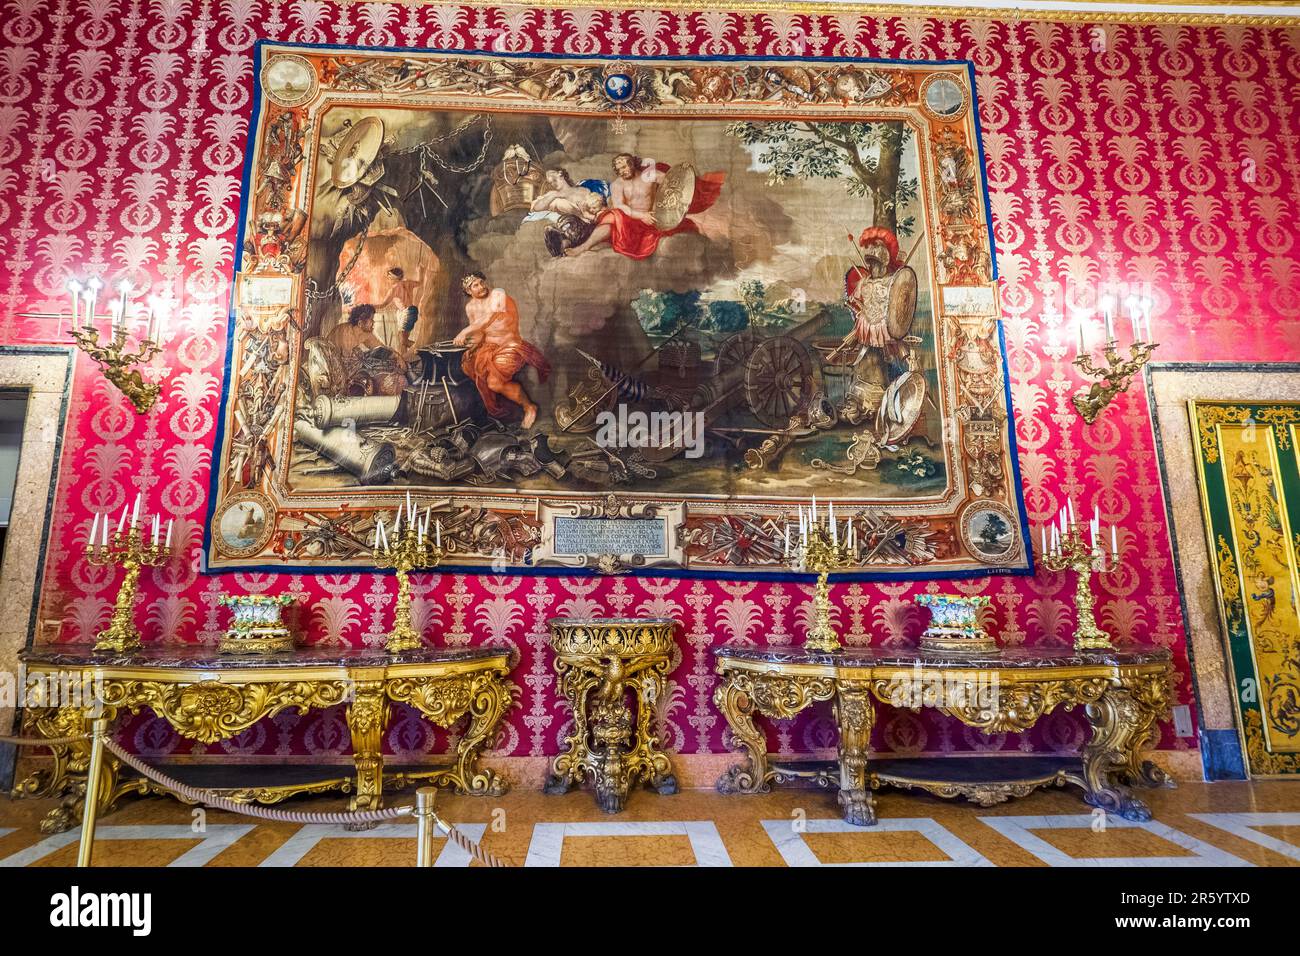 Neo-Baroque style furniture and tapestry from the Manifacture Royale des Gobelins (2nd half of the 19th century during the Savoy period)  in the first Antechamber (diplomatic Salon) in the Royal Palace of Naples that In 1734 became the royal residence of the Bourbons - Naples, Italy Stock Photo